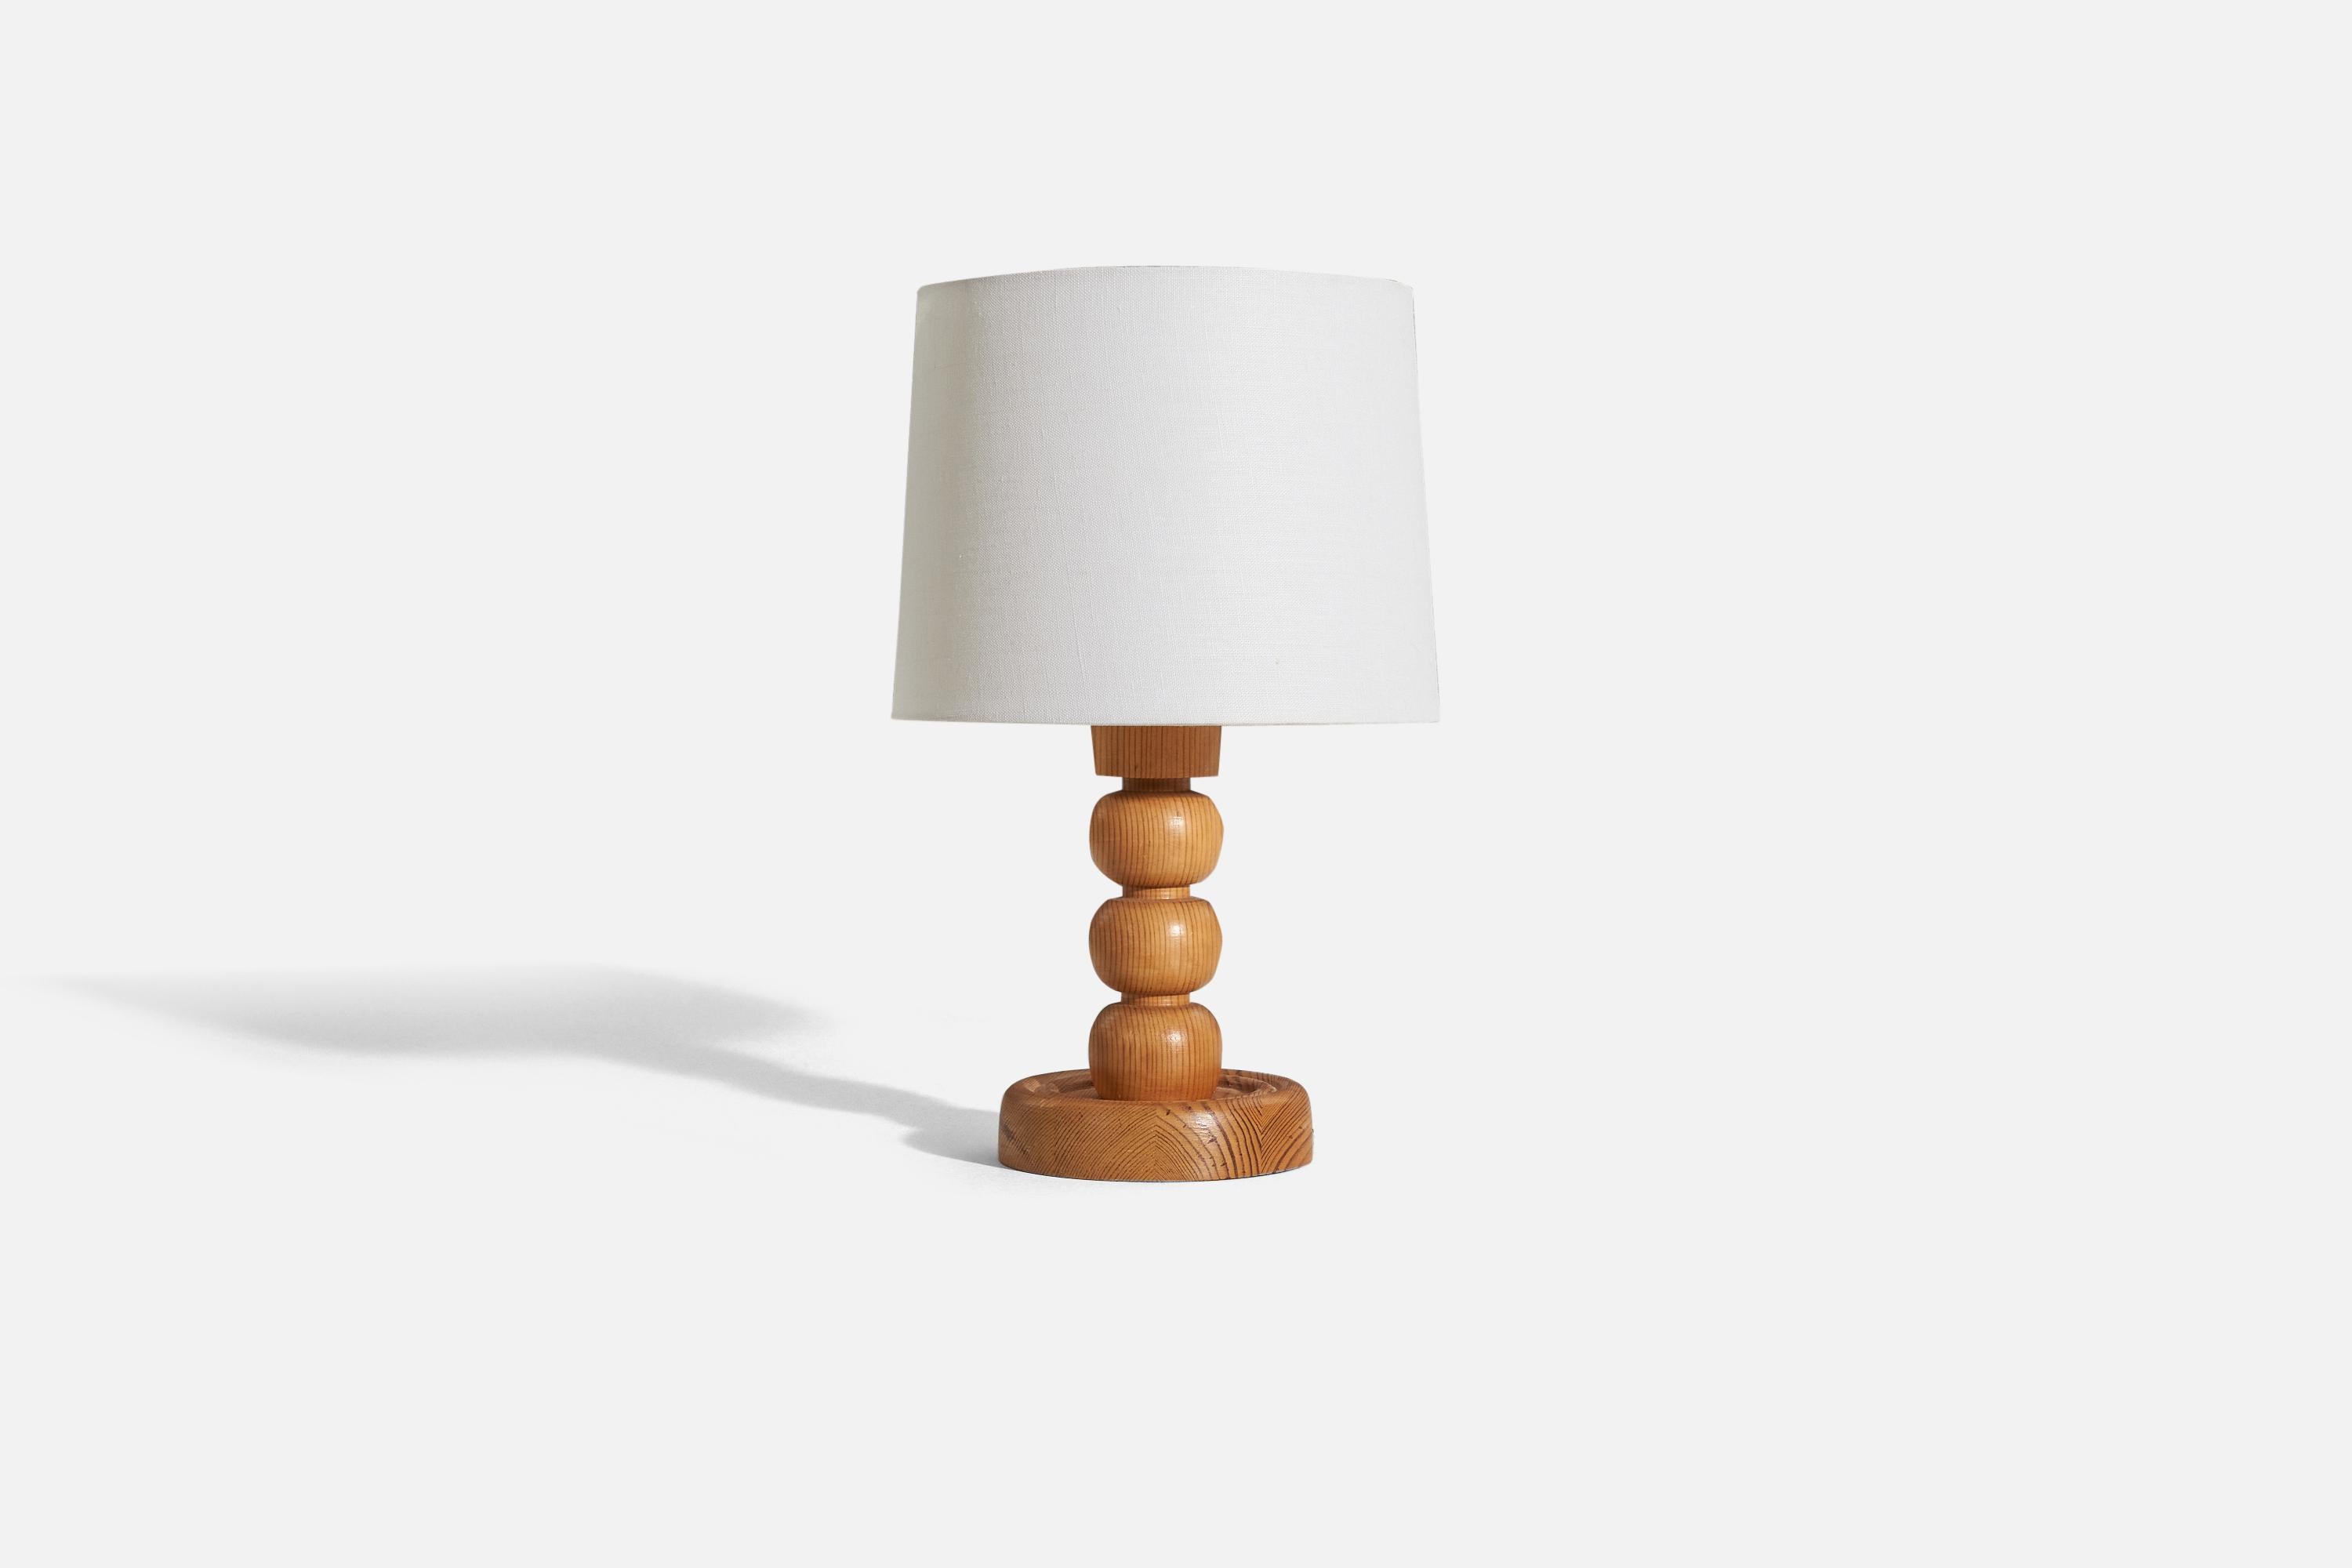 A solid pine table lamp designed and produced by a Swedish designer, Sweden, 1970s.

Sold without lampshade. 
Dimensions of Lamp (inches) : 11.25 x 5.875 x 5.875 (H x W x D)
Dimensions of Shade (inches) : 9.125 x 10 x 7.875 (T x B x H)
Dimension of